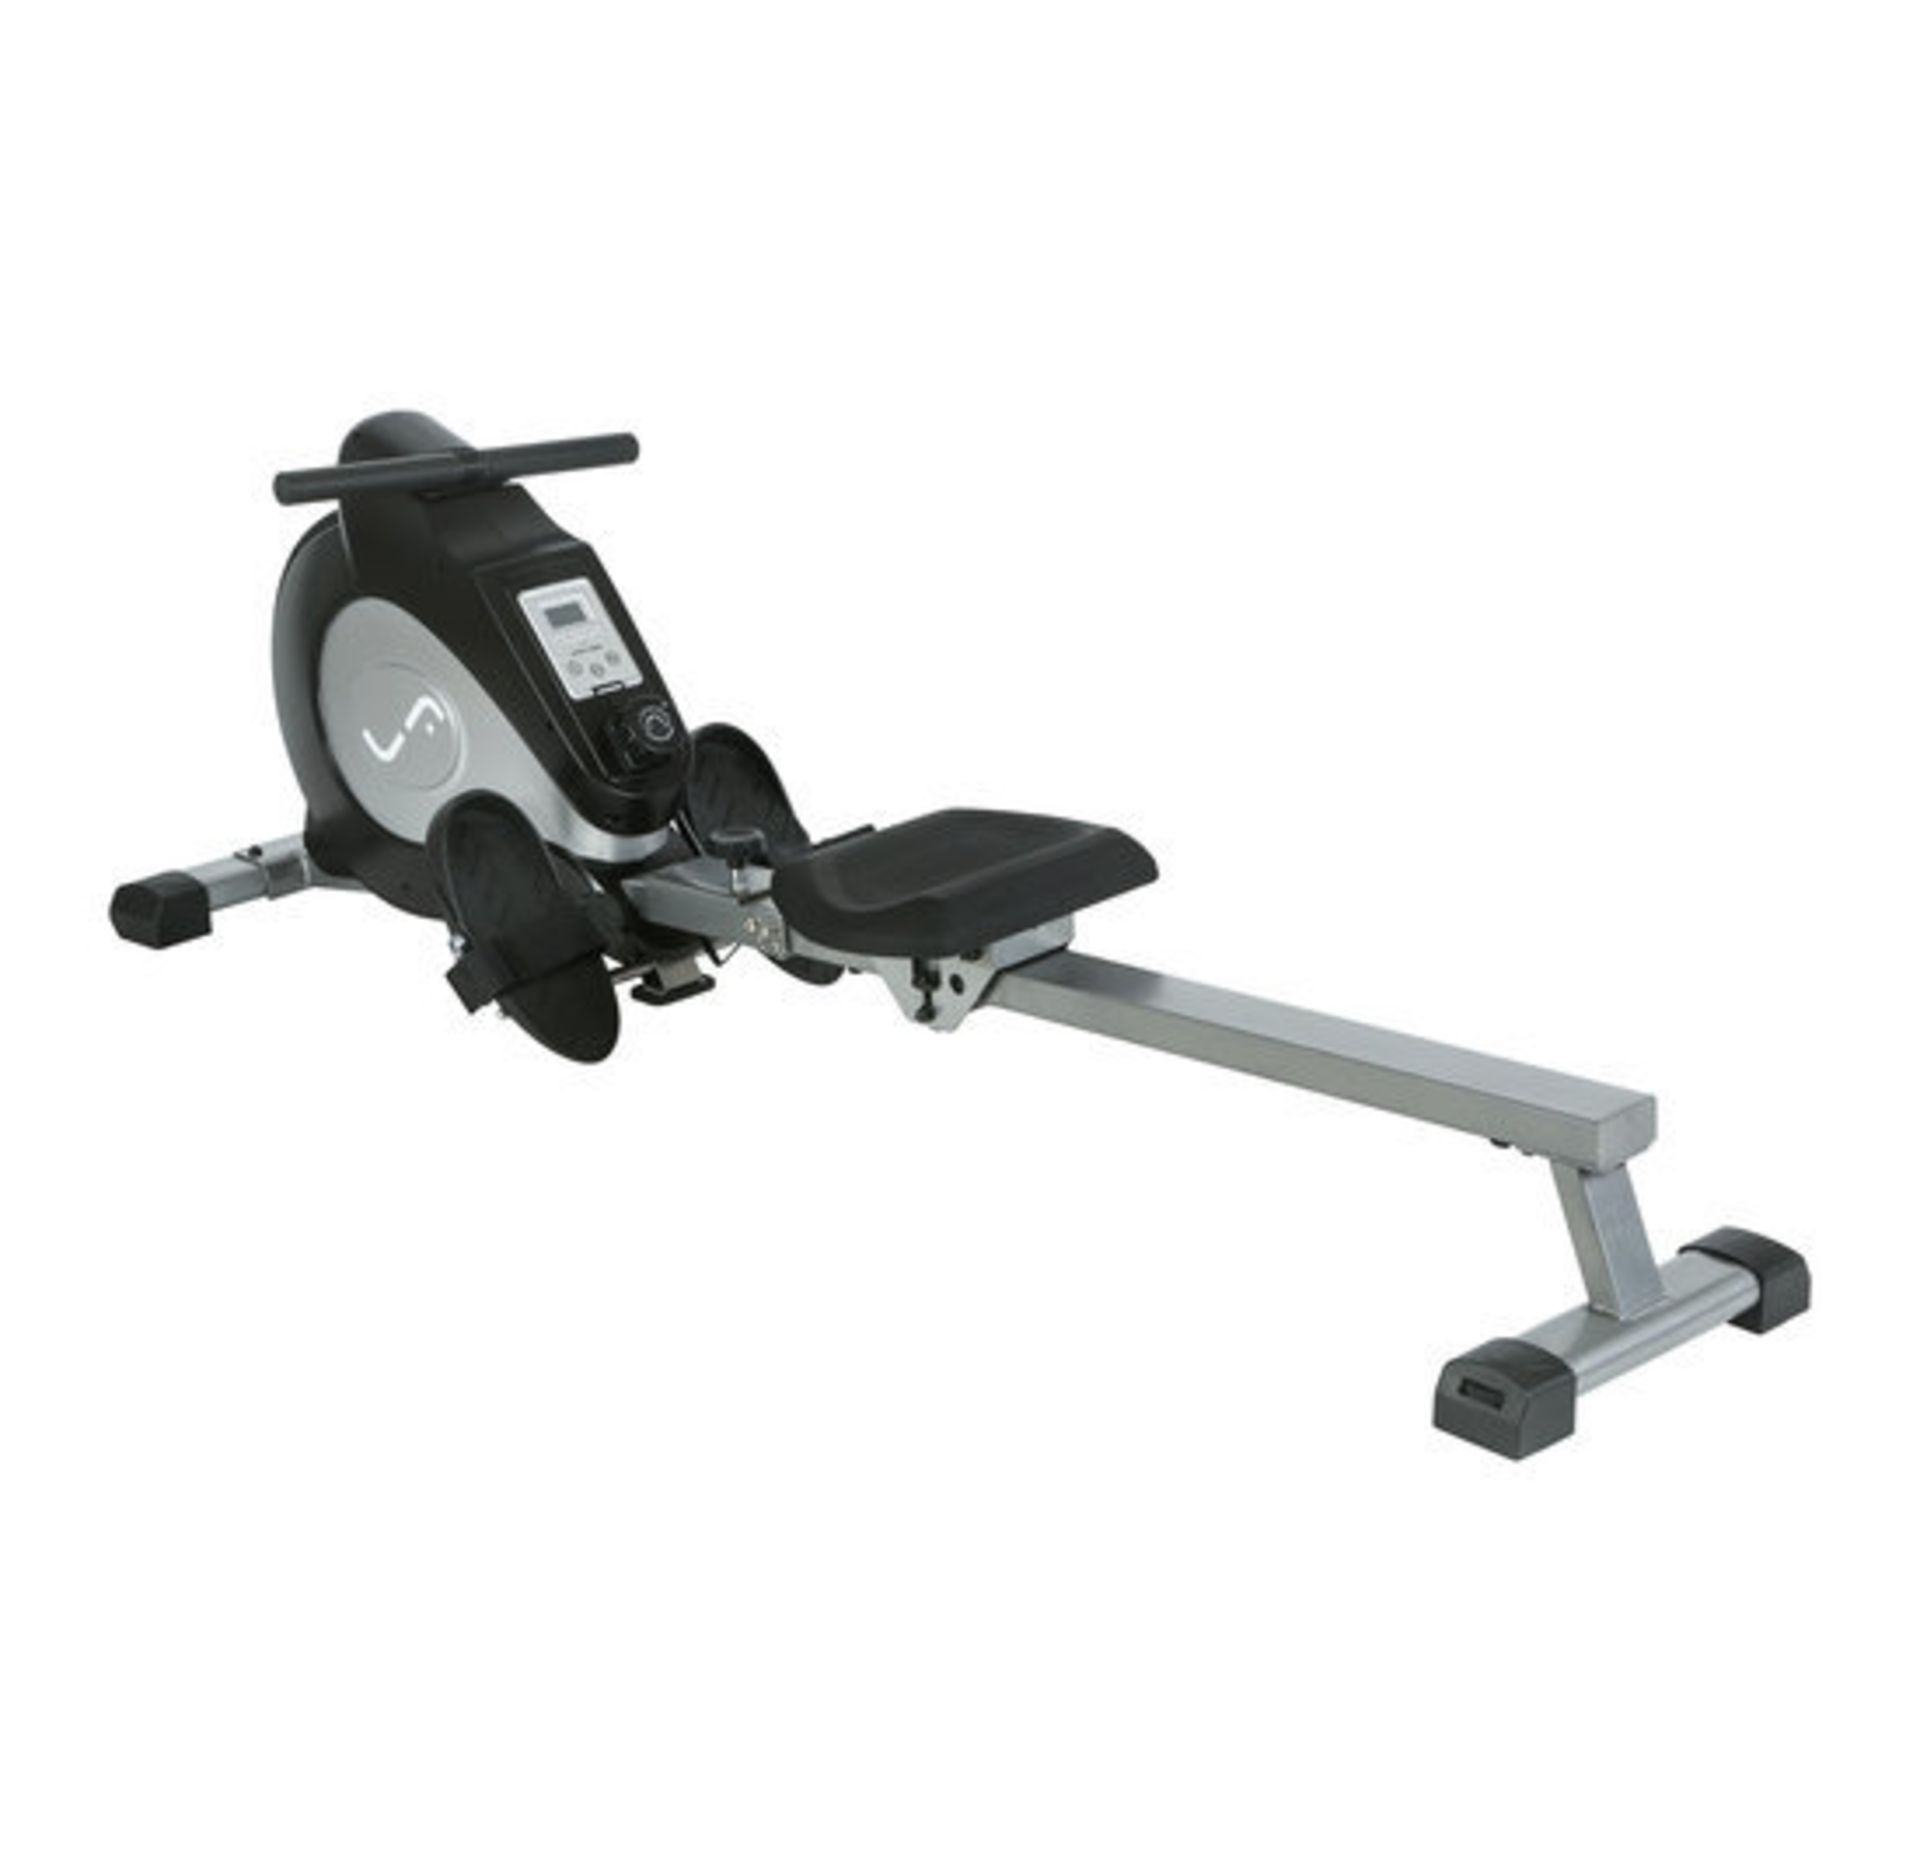 BRAND NEW ROWFIT-2.5 FOLDABLE ROWING MACHINE - *** RRP £248 ***